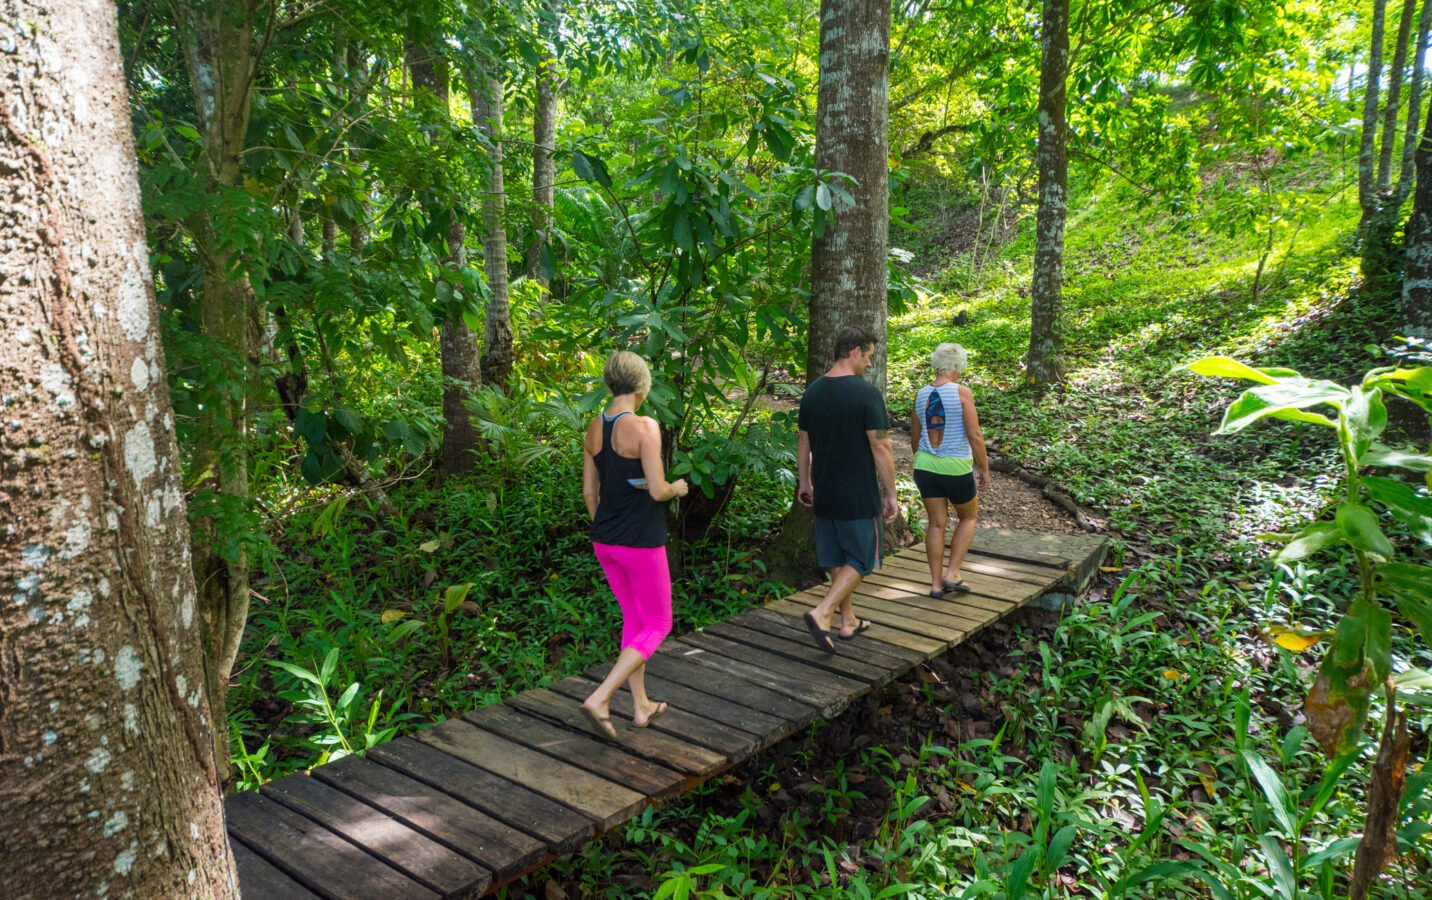 Walk on our retreat center nature trail and catch some tropical wildlife